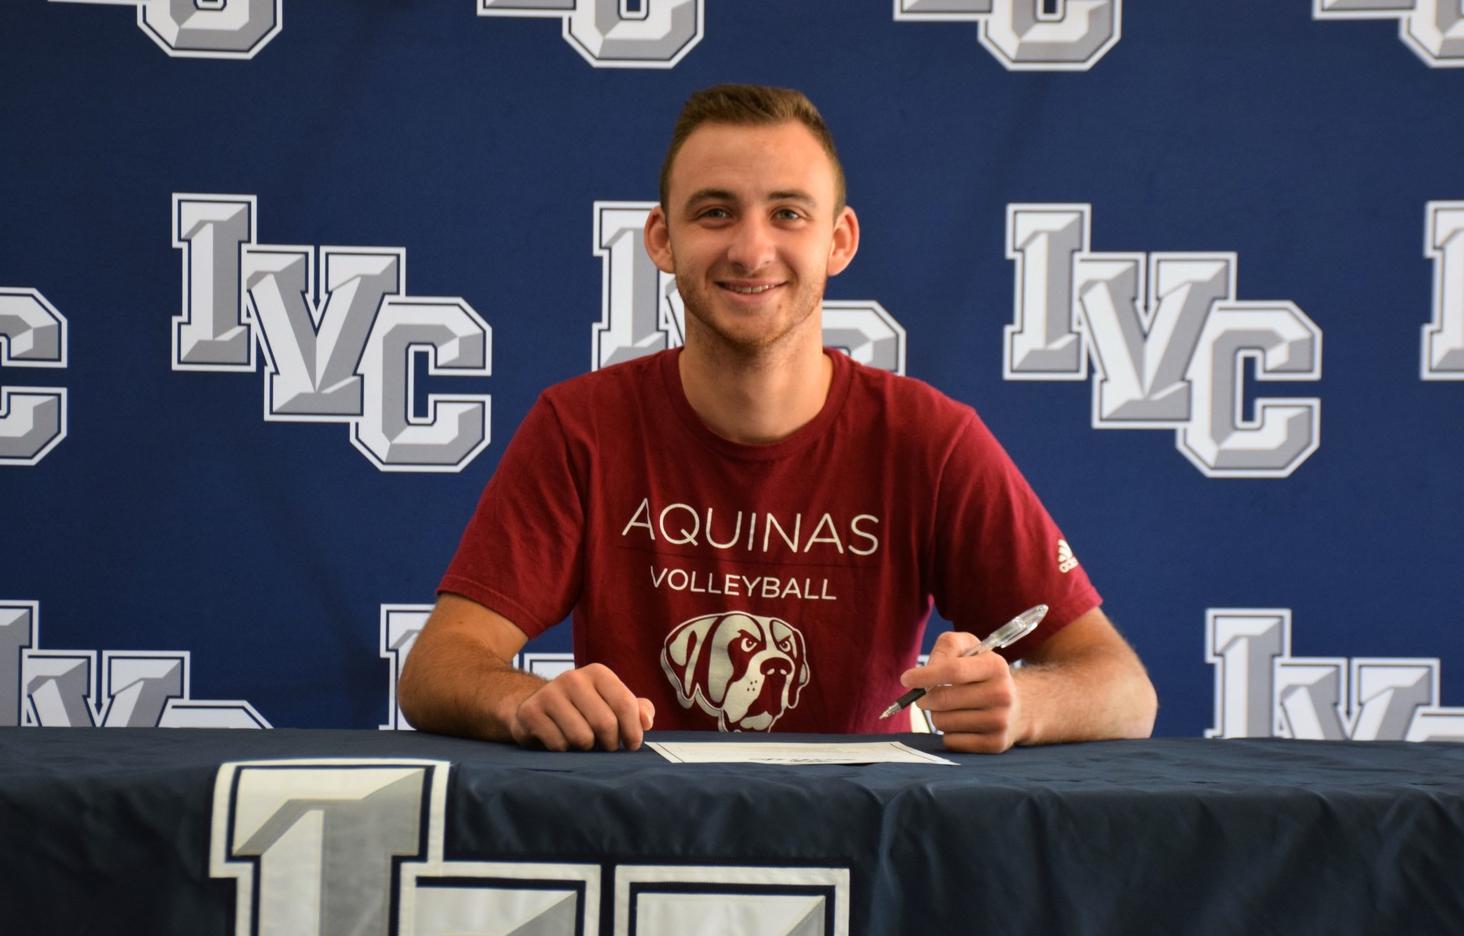 Men's volleyball player Josh Evers headed to Aquinas College